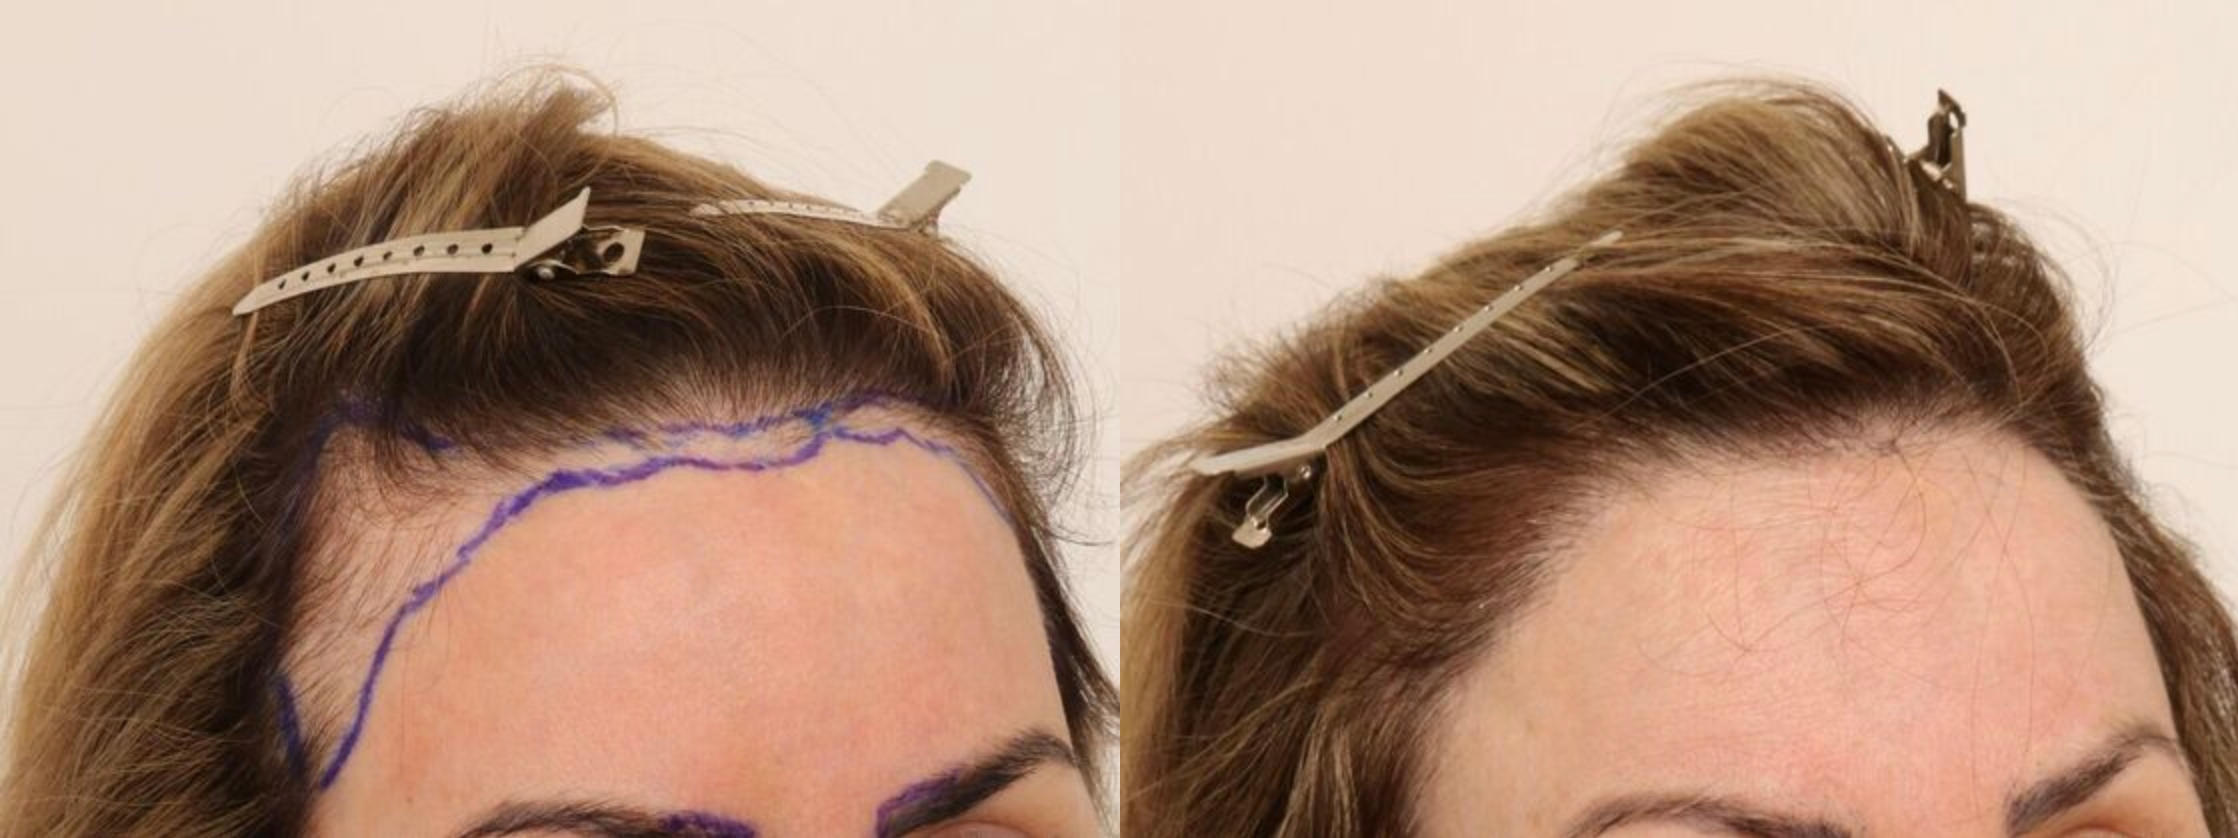 Before and After at The Hair Loss Doctors | New York, NY